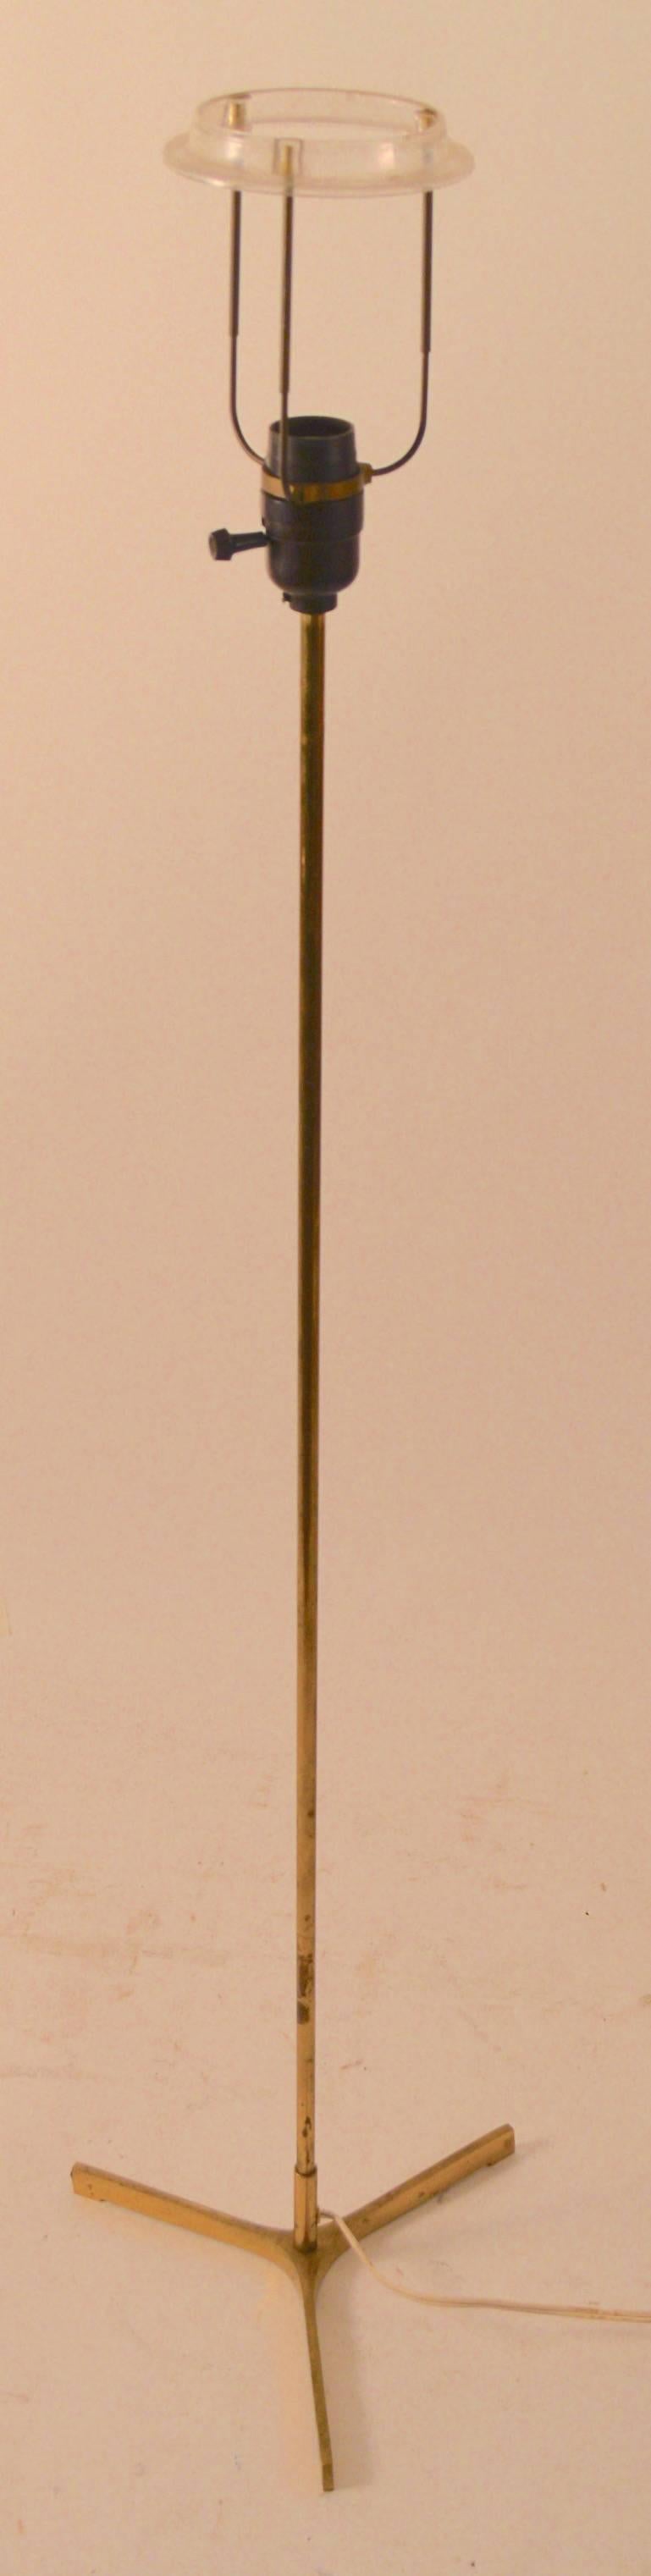 Elegantly proportioned brass floor lamp with tri-part foot. Original shade included for template, shade has stains etc. Brass finish shows wear, and tarnish.